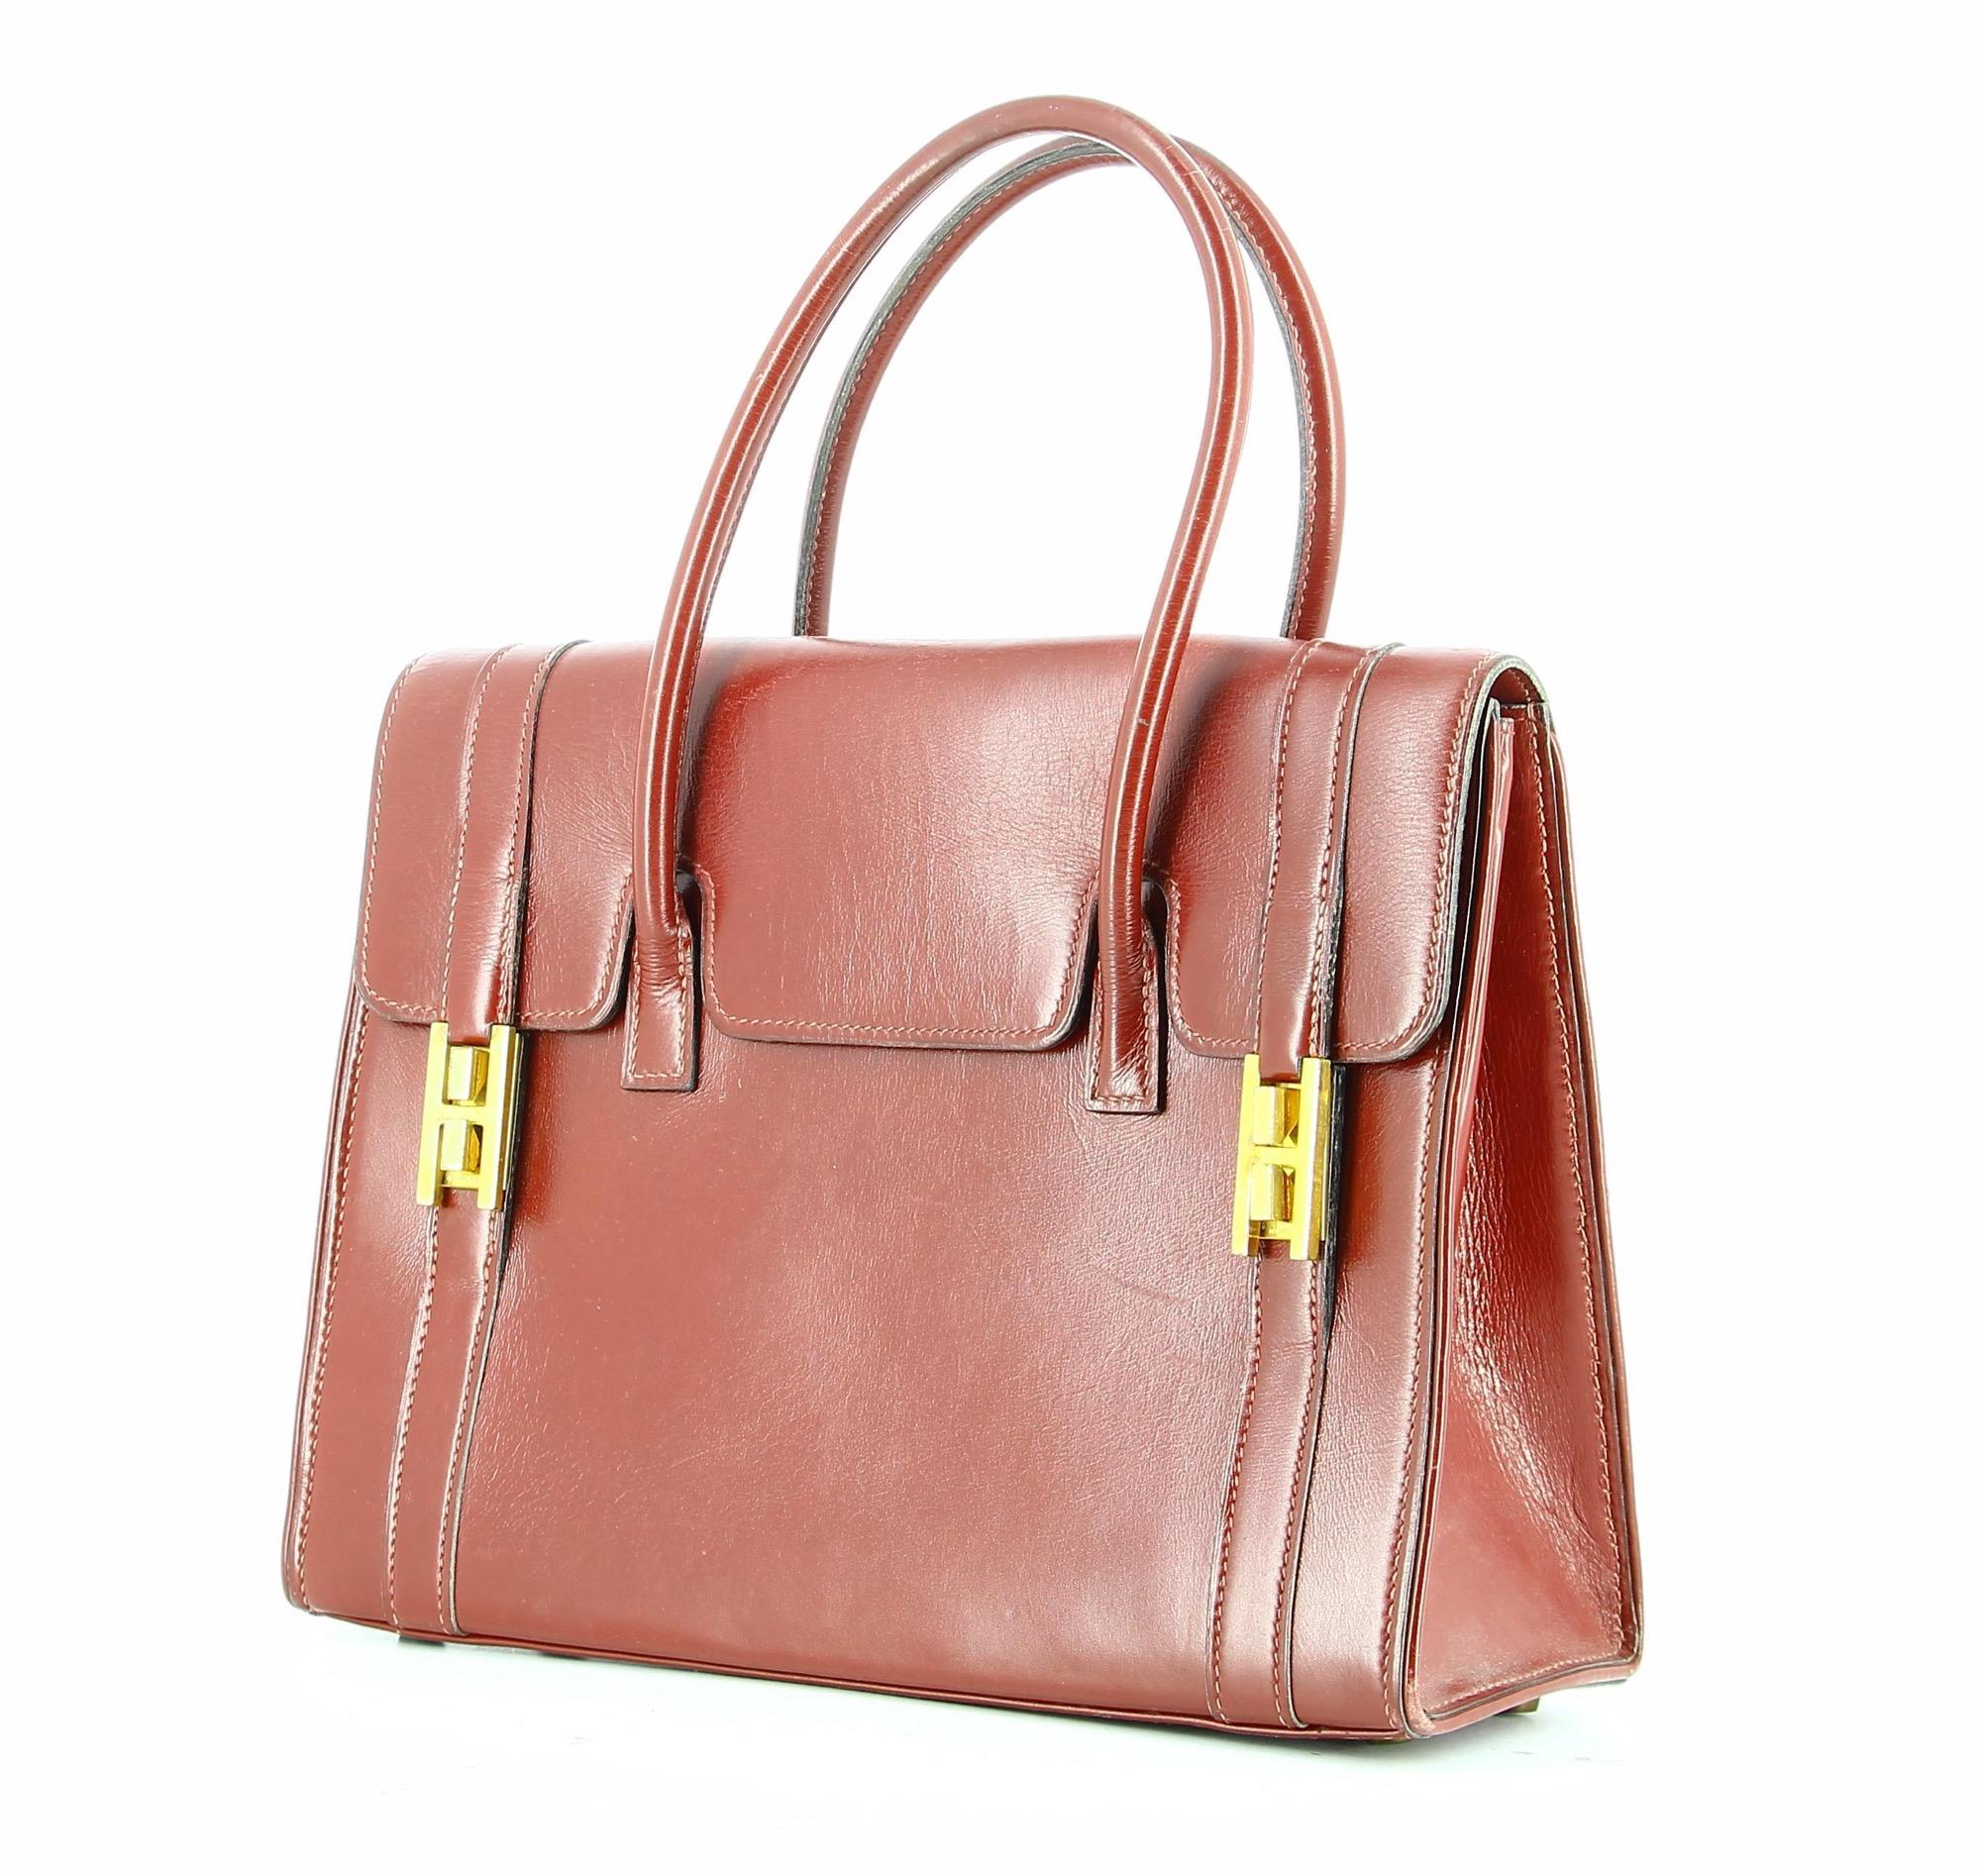 Hermes 60's Drag bag in red burgundy leather.
Some signs of use, tarnishing in the claso, signs of use in the leather but overall greta condition for a 60 years old bag
Stamp: Hermes Paris